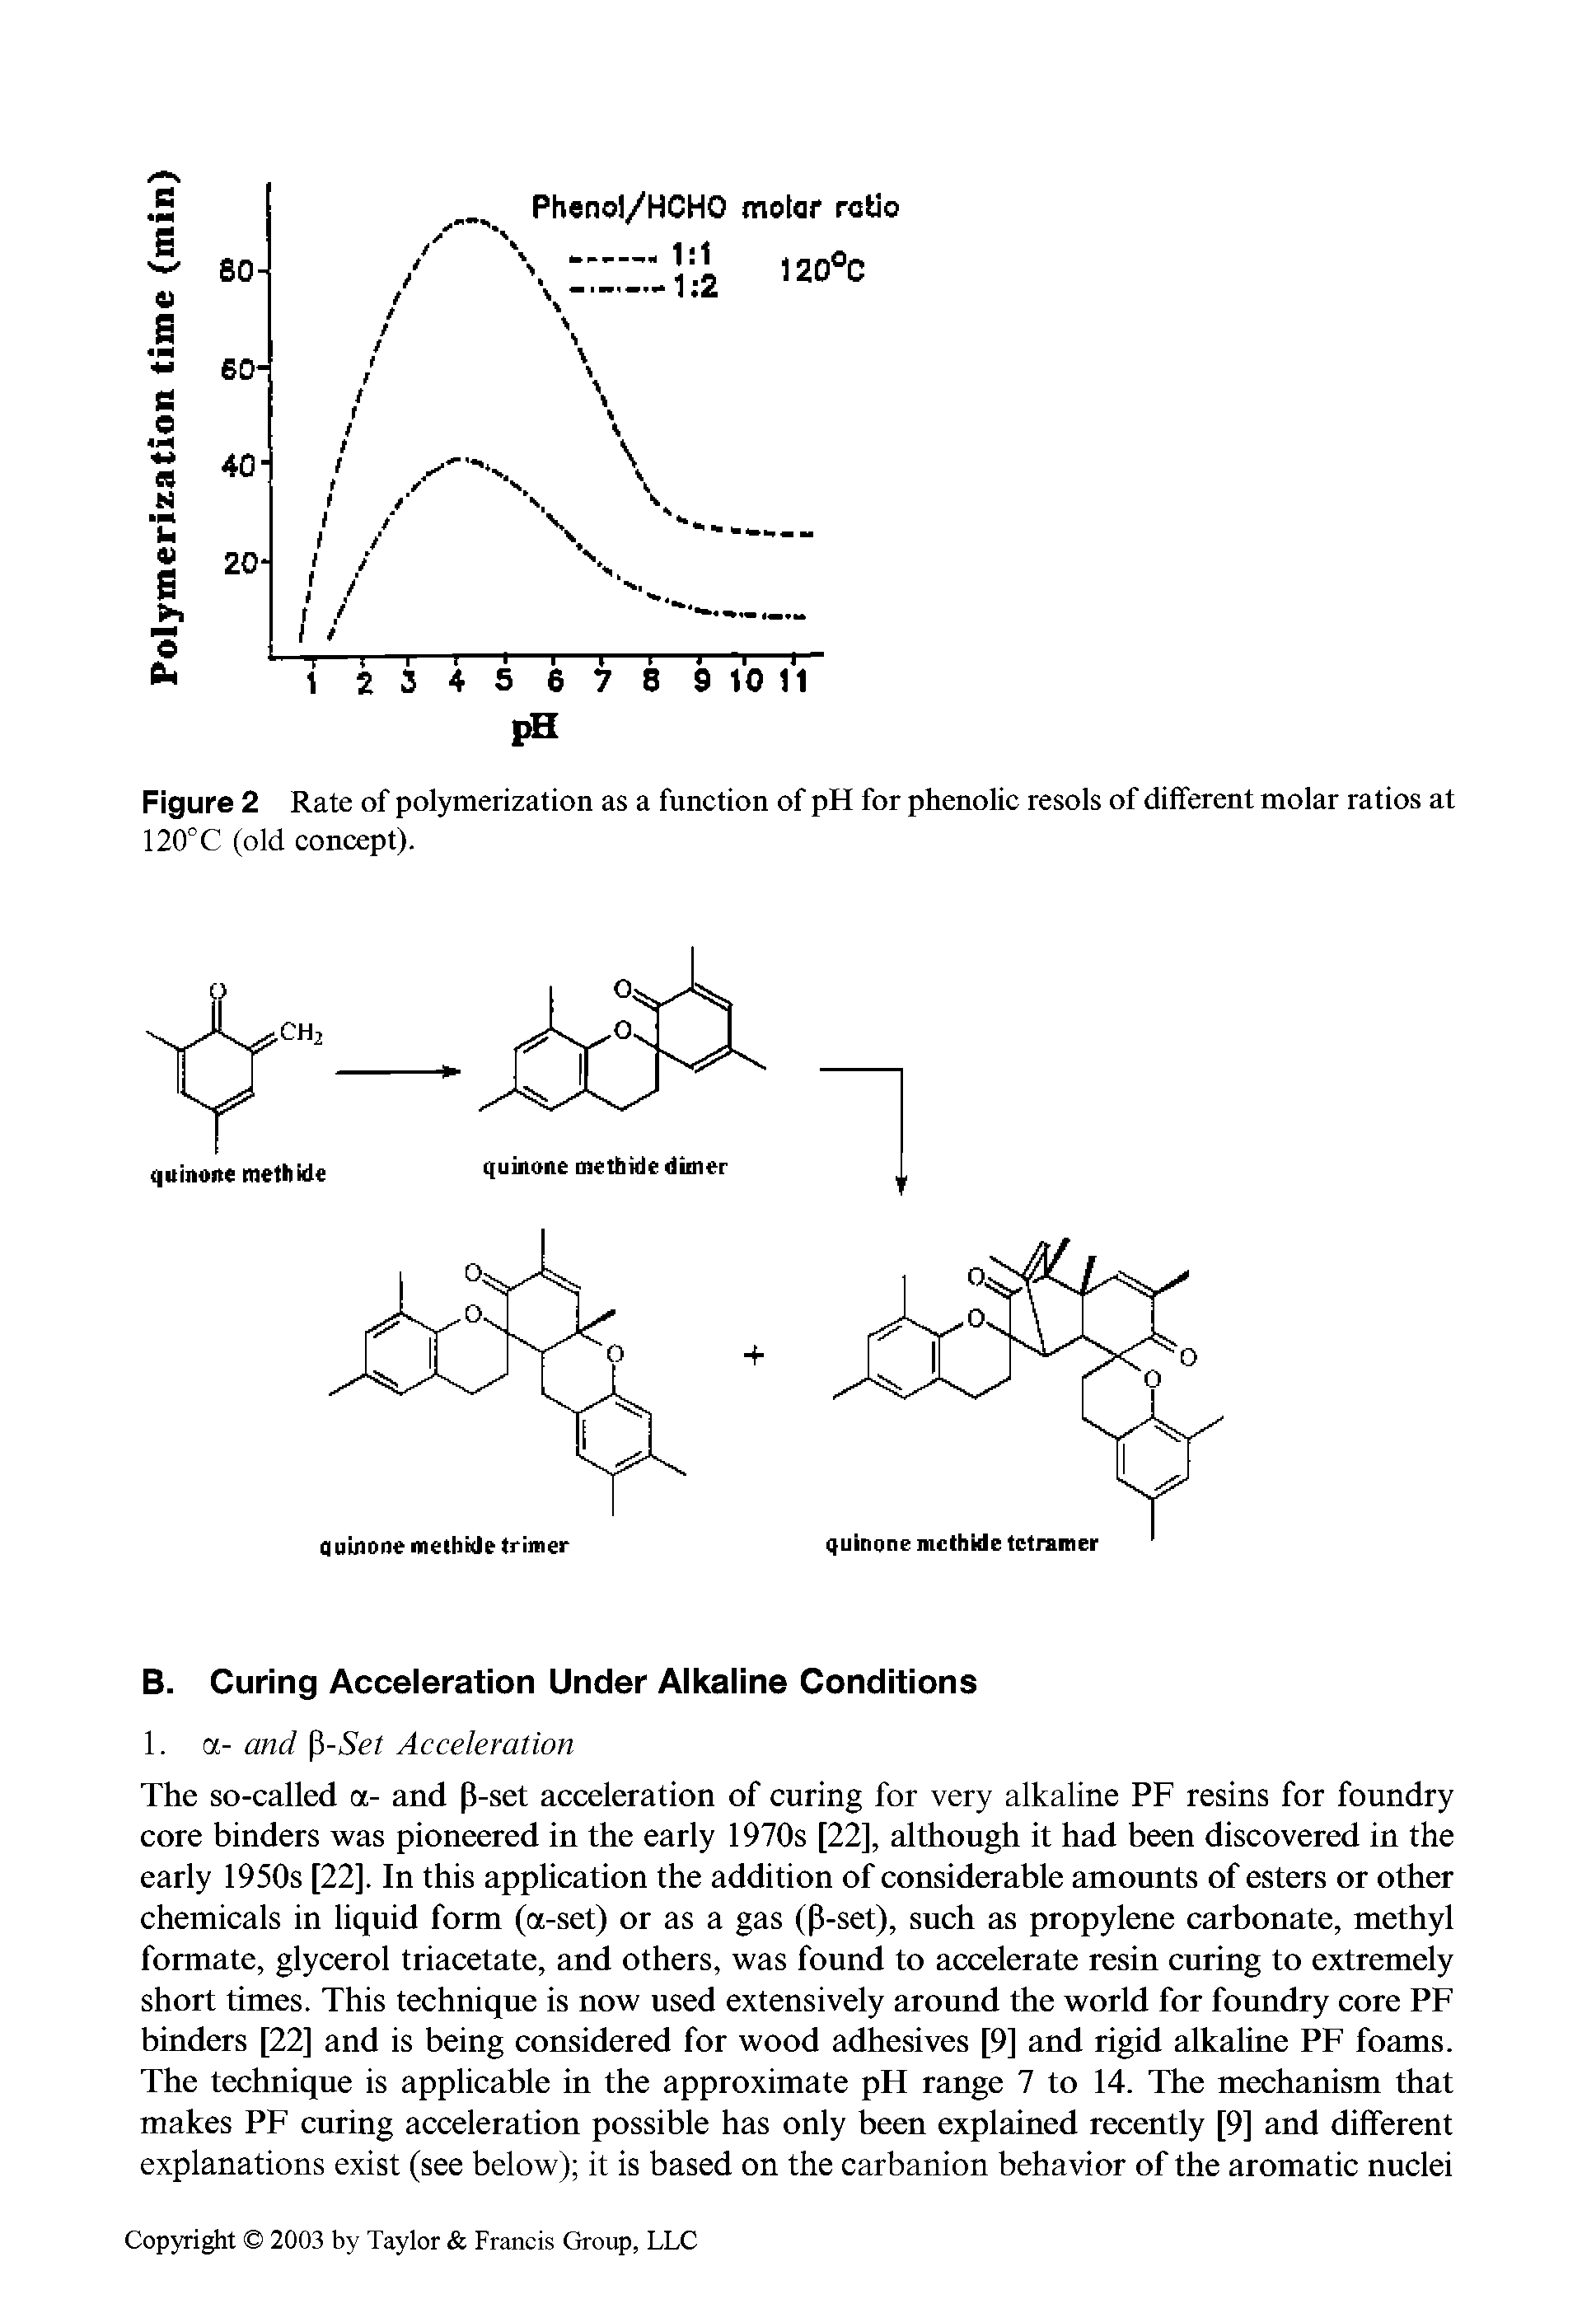 Figure 2 Rate of polymerization as a function of pH for phenolic resols of different molar ratios at 120°C (old concept).